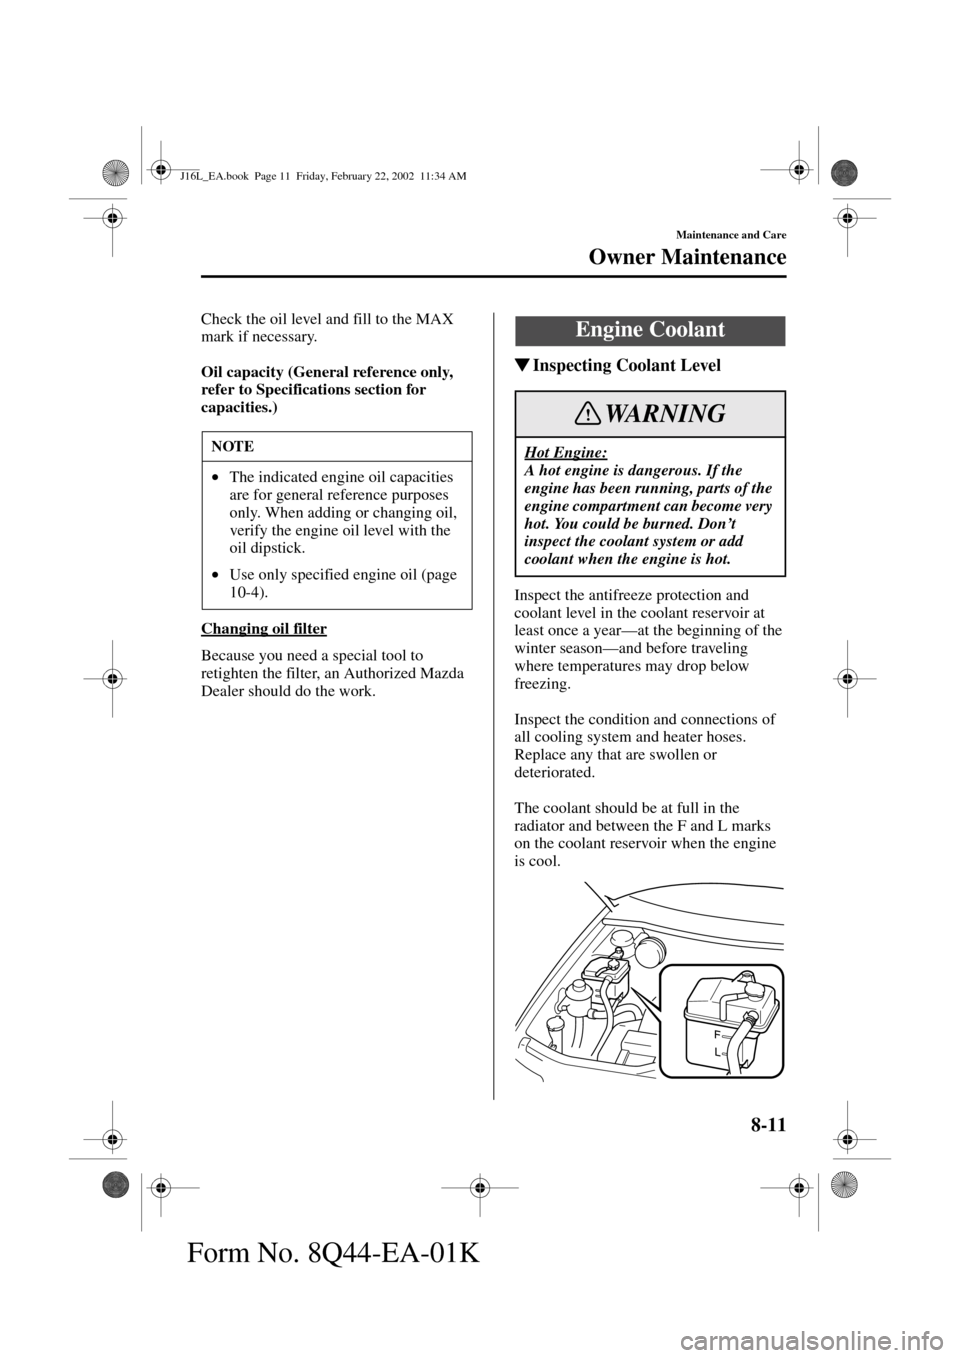 MAZDA MODEL MPV 2002  Owners Manual (in English) 8-11
Maintenance and Care
Owner Maintenance
Form No. 8Q44-EA-01K
Check the oil level and fill to the MAX 
mark if necessary.
Oil capacity (General reference only, 
refer to Specifications section for 